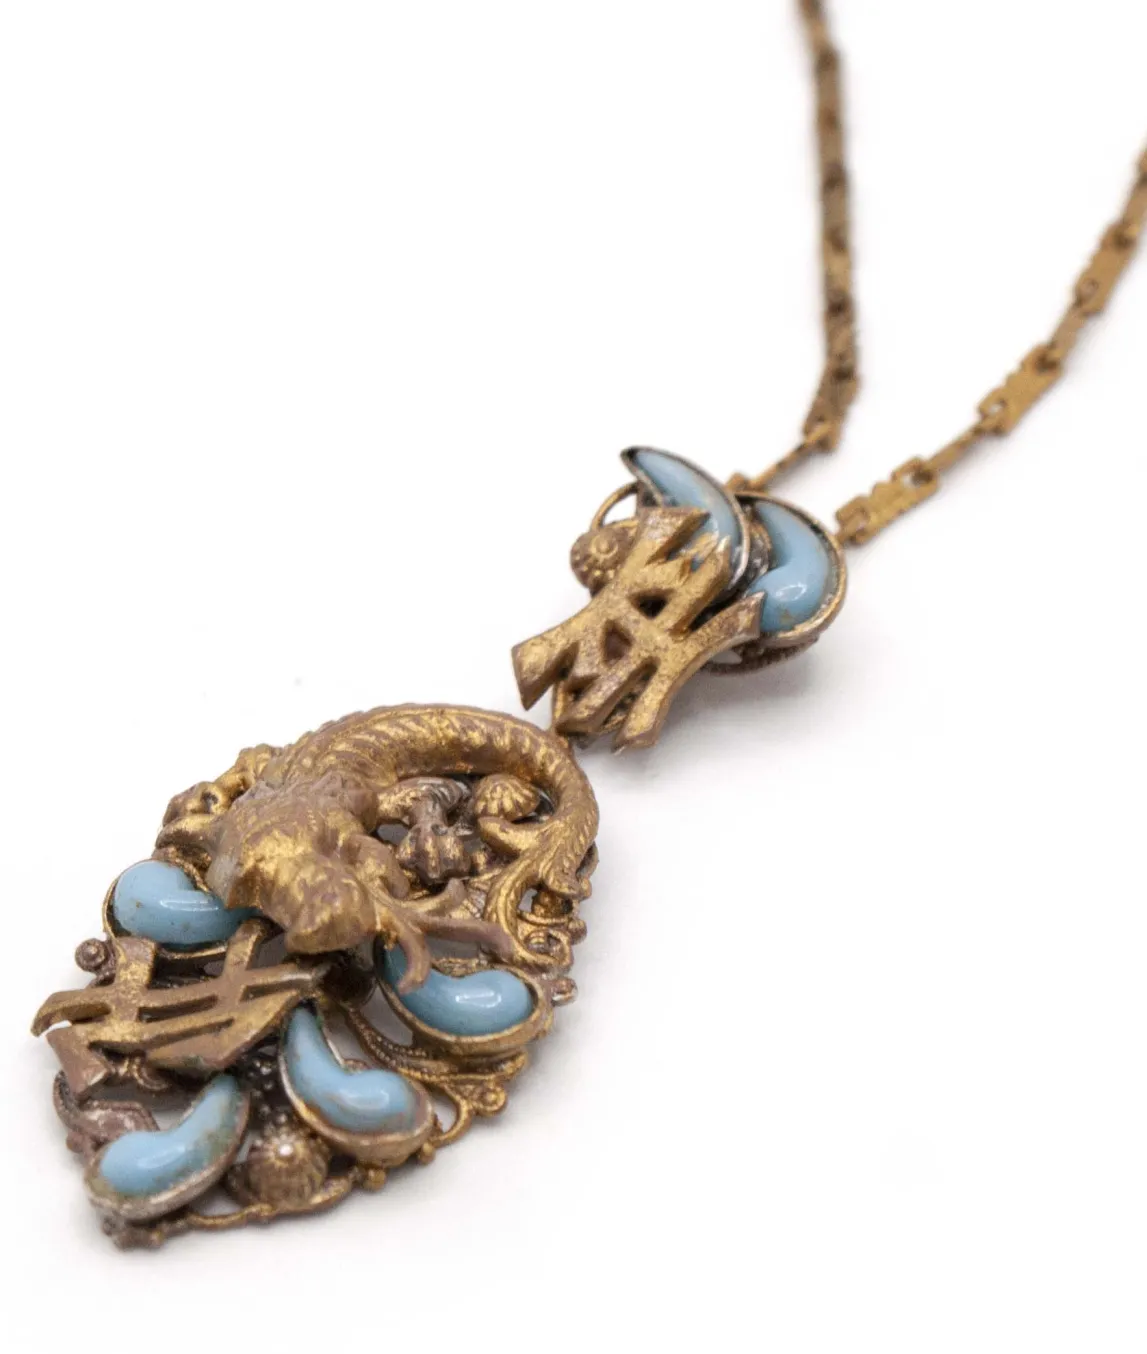 Neiger brothers dragon pendant chain with blue decoration